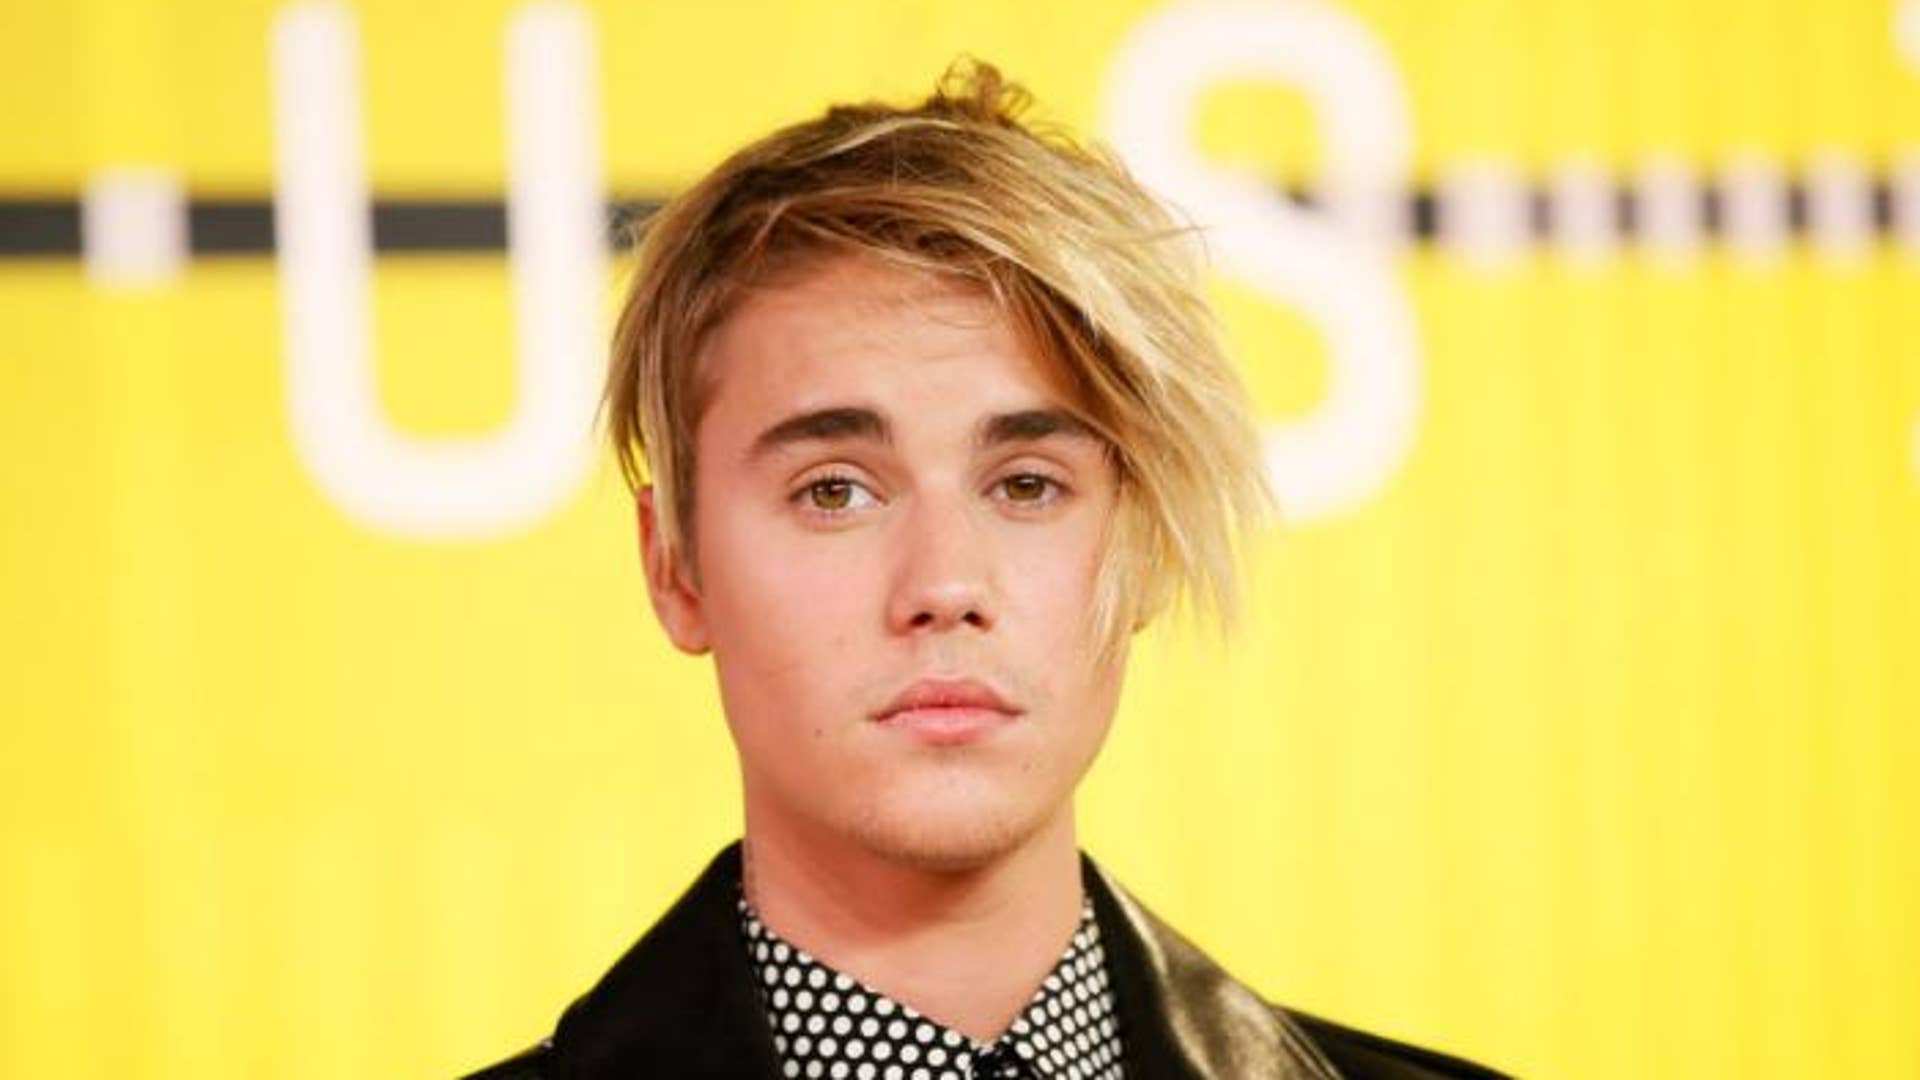 Justin Bieber Debuted New Hairstyle in Drake's 